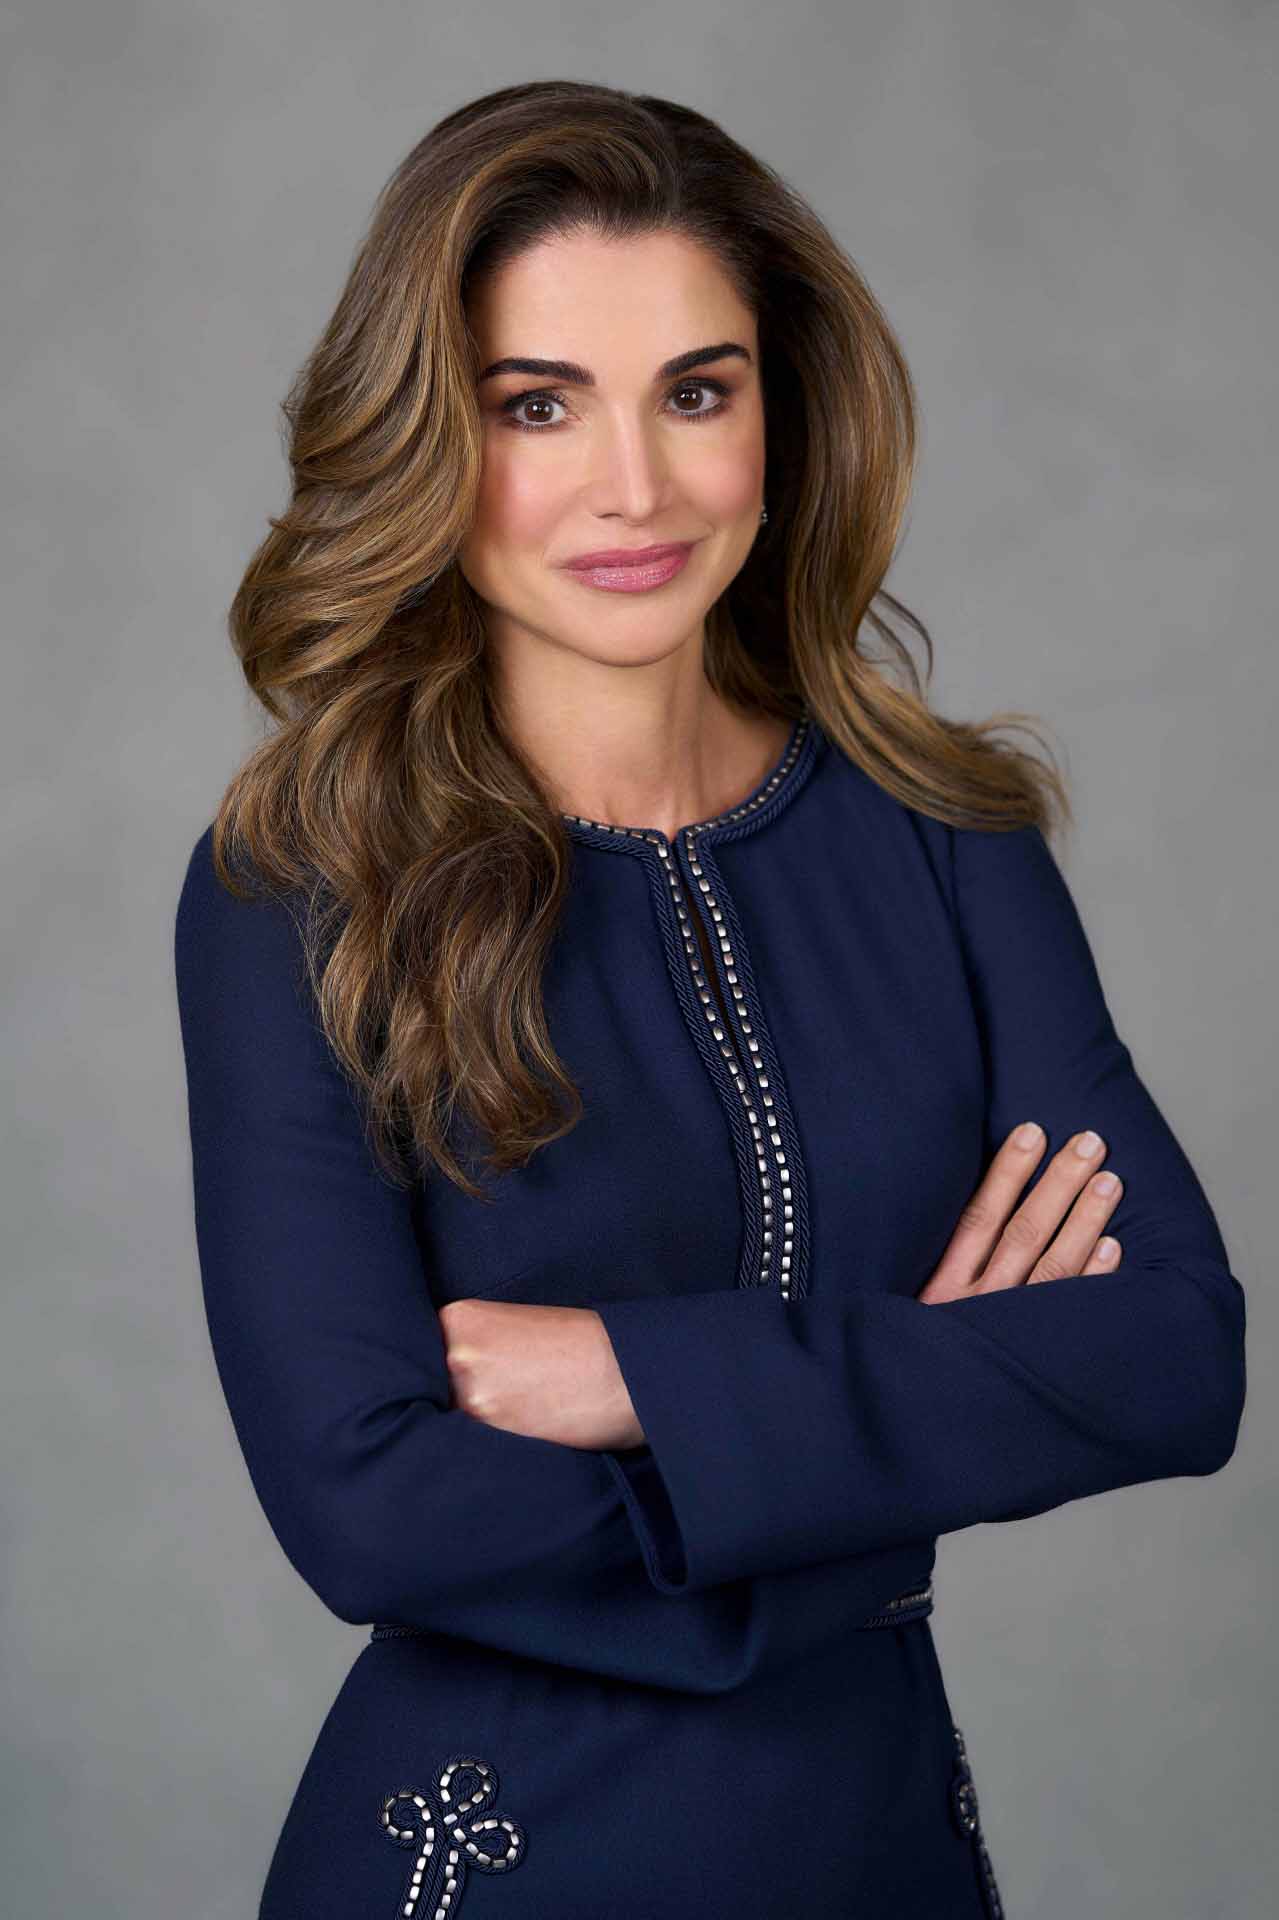 Queen Rania of Jordan in Amman, on August 23, 2022, 3 new portraits on the occasion of her birthday on Wednesday, August 31 Photo by: Royal Hashemite Court/picture-alliance/dpa/AP Images  Adel;Leute;Mensch;menschen;Monarchie;Personen;? Personen;Royals ?